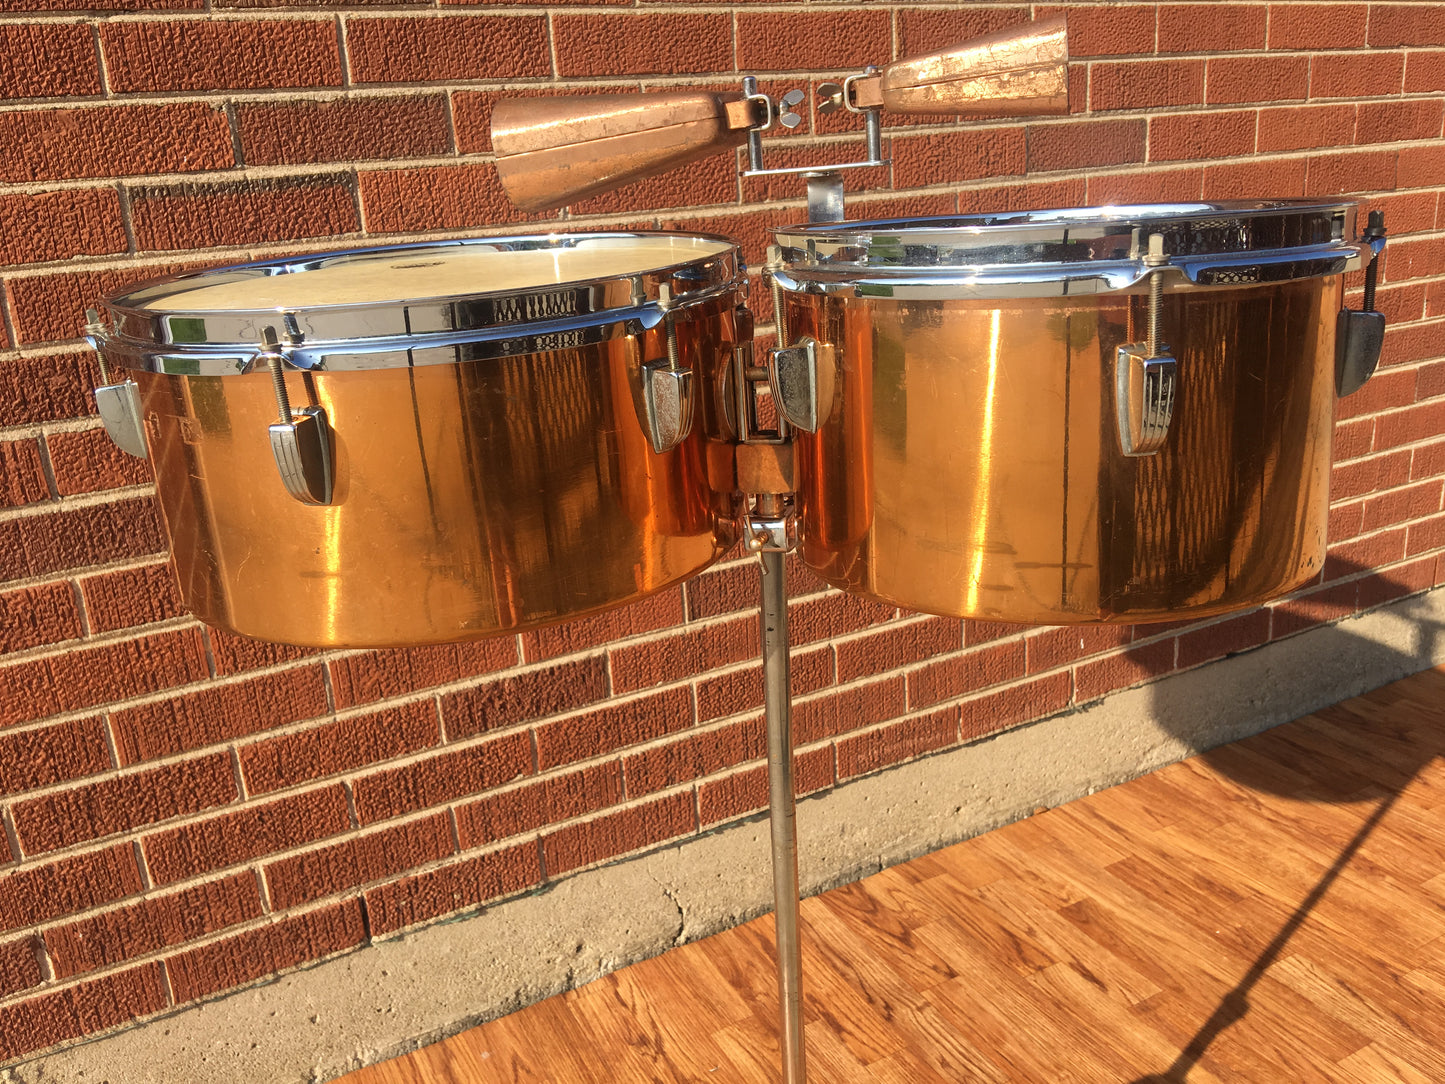 1948-52 WFL / Ludwig Timbale Drum Set With Dual Cowbells and Stand  10.5" & 13"